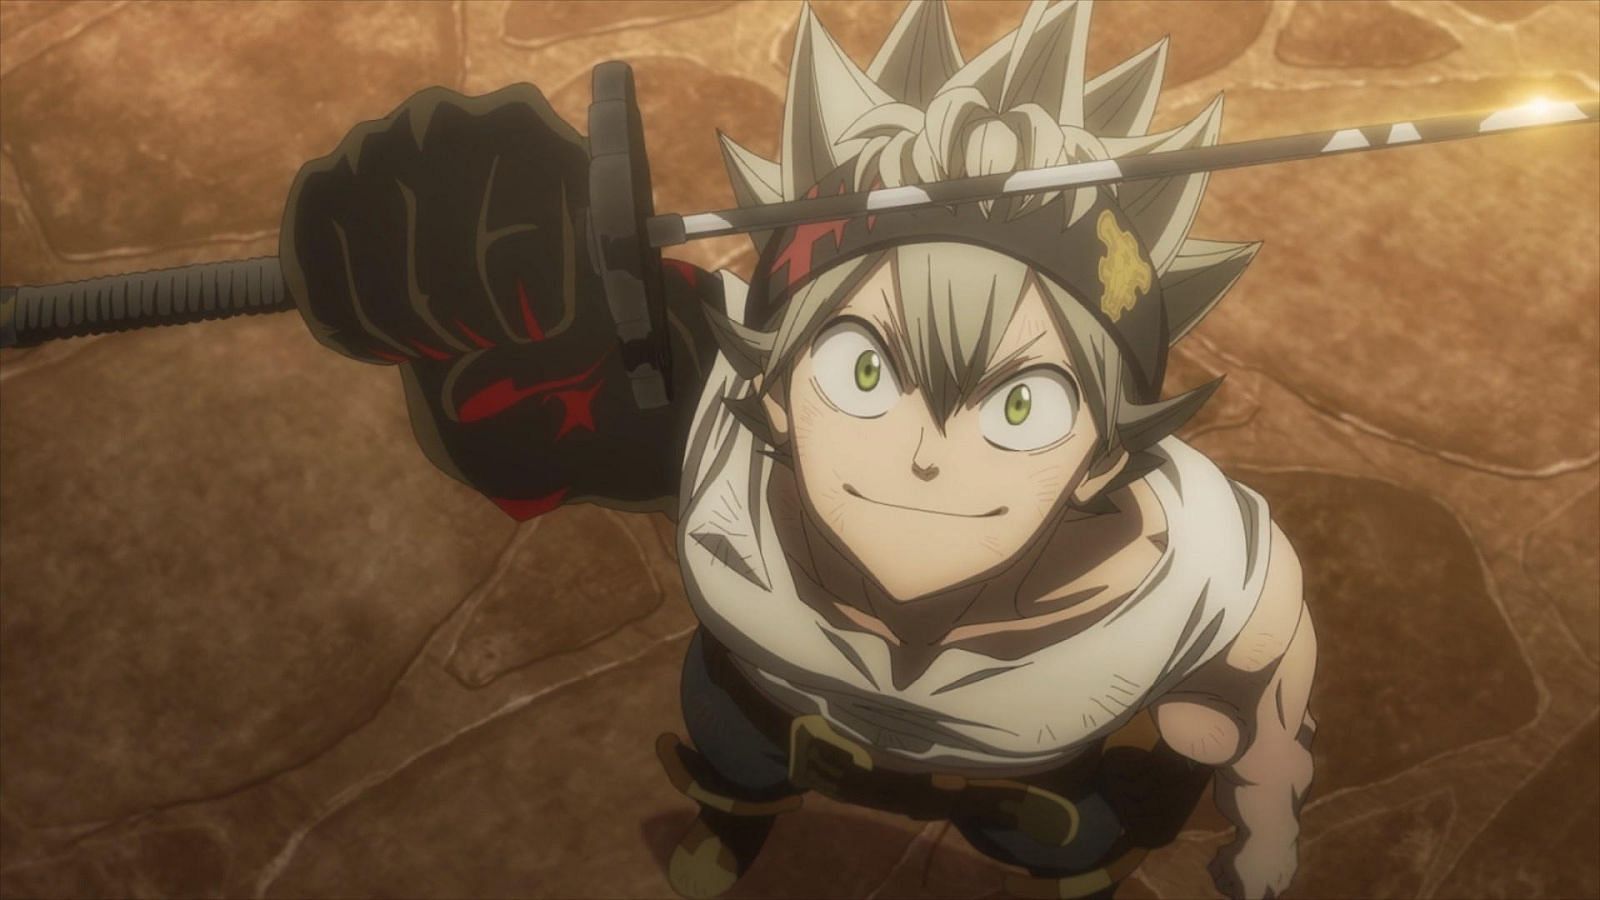 Black Clover is getting axed?”: Anime Fans All Over the World Cower In Fear  as Manga Hints End is Nigh - FandomWire